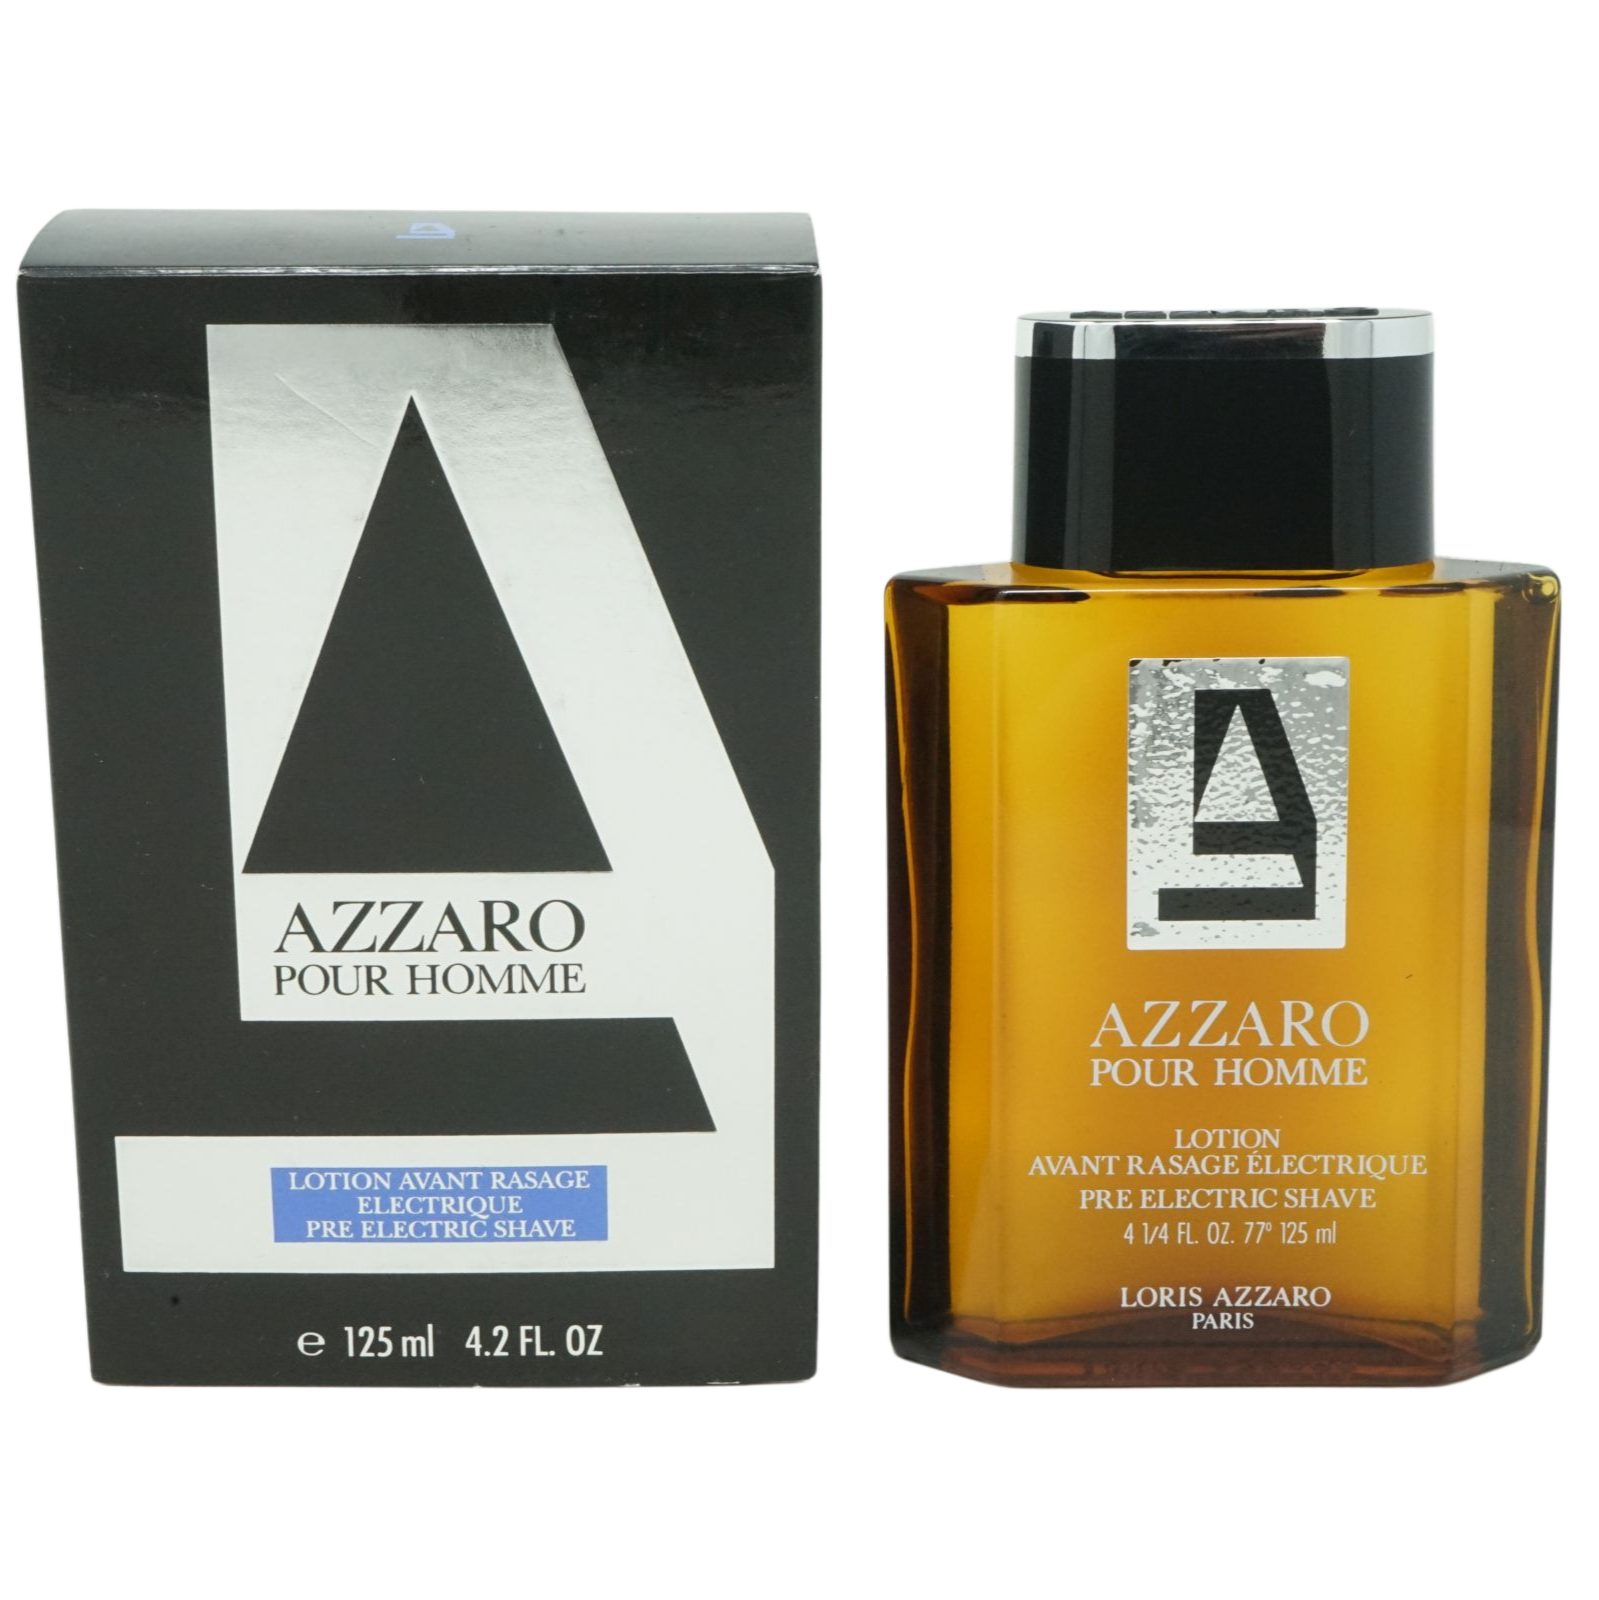 Azzaro After-Shave Azzaro pour homme Lotion Avant Rasage 125ml